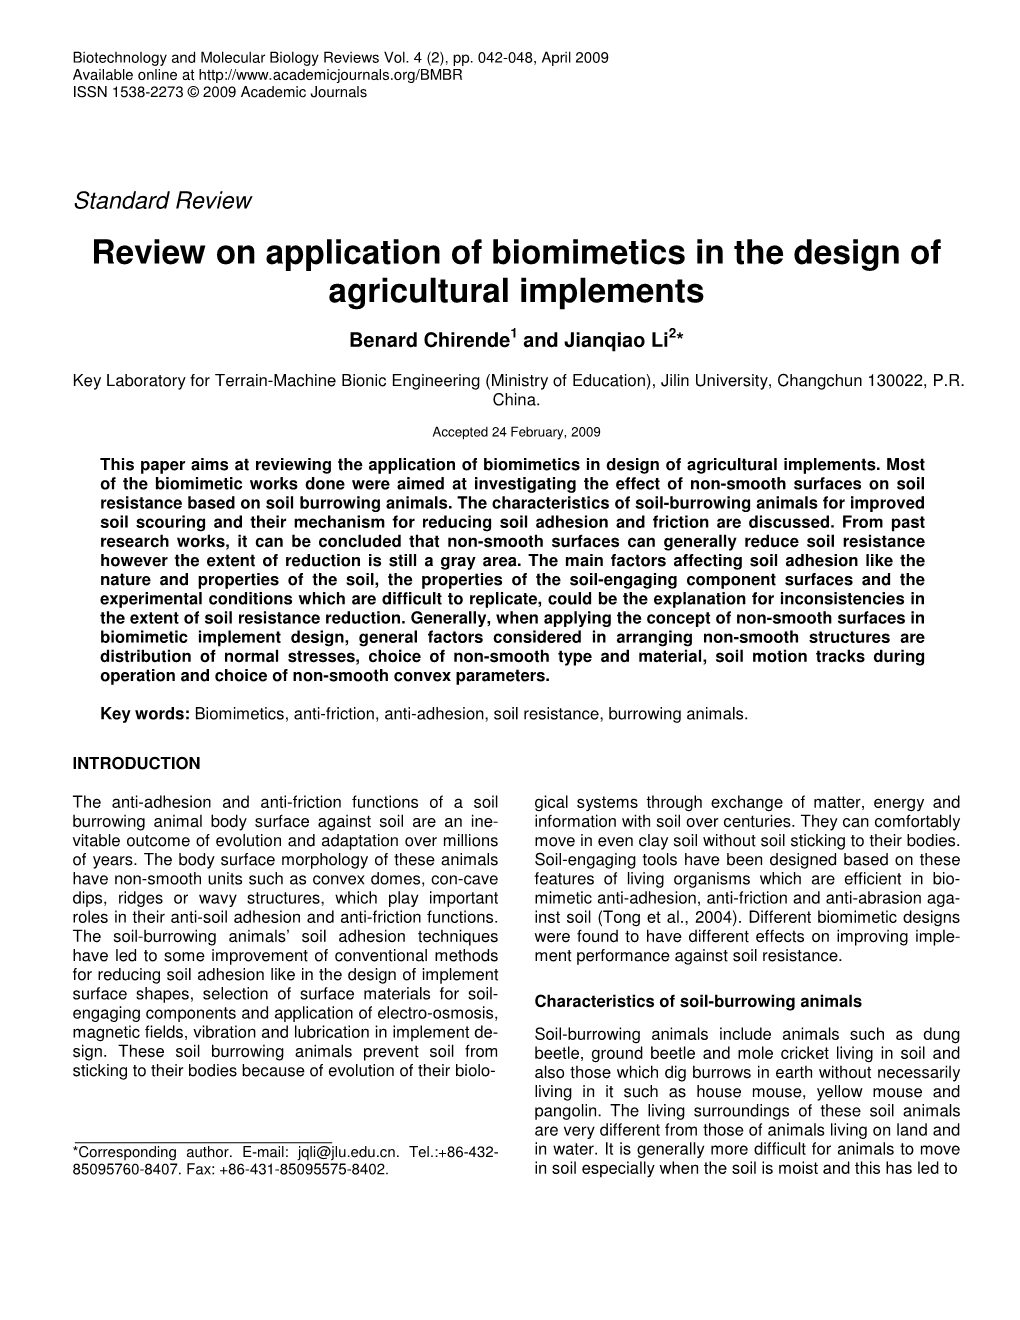 Review on Application of Biomimetics in the Design of Agricultural Implements